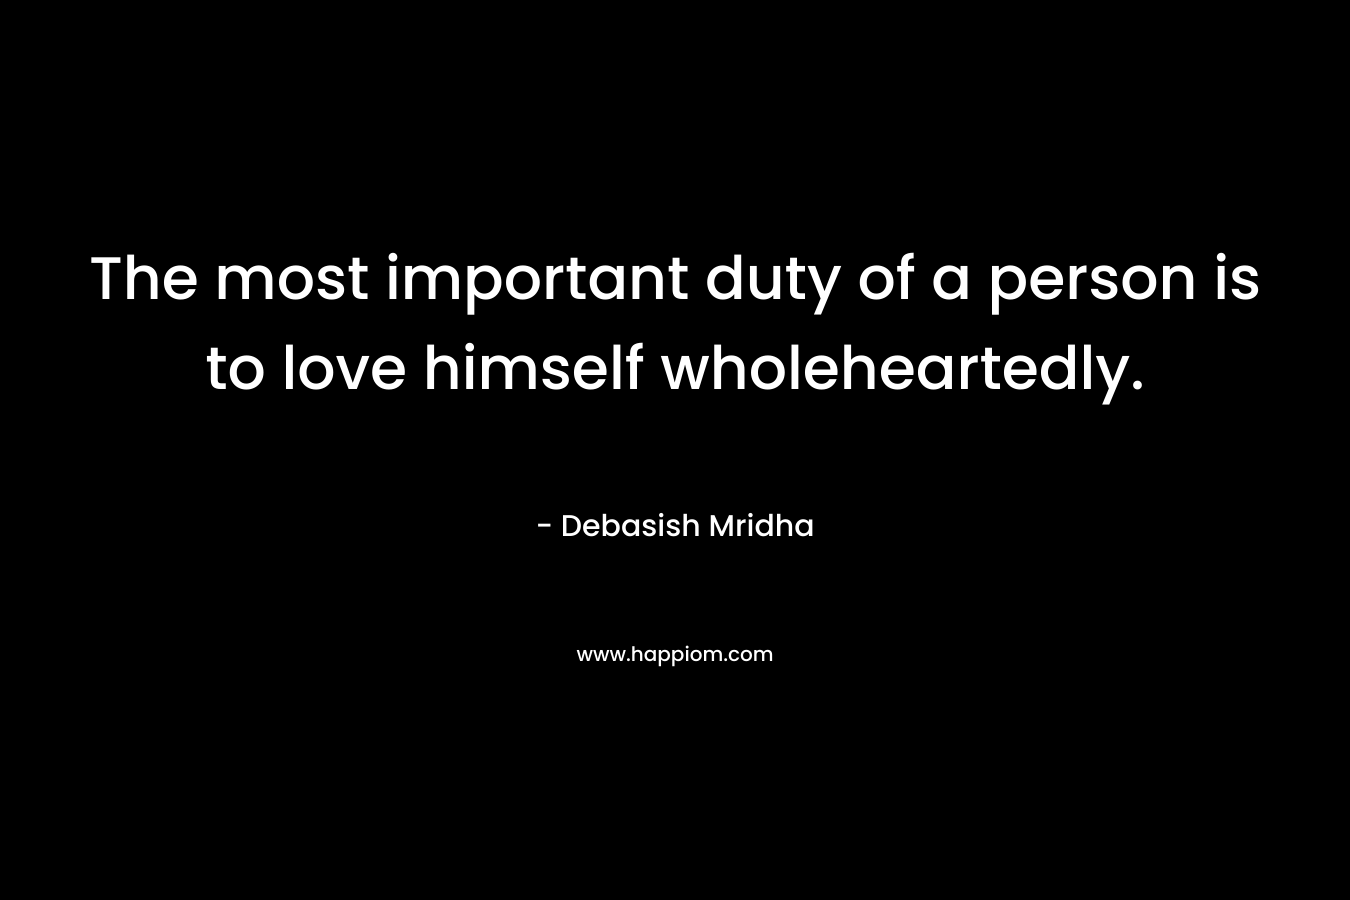 The most important duty of a person is to love himself wholeheartedly.